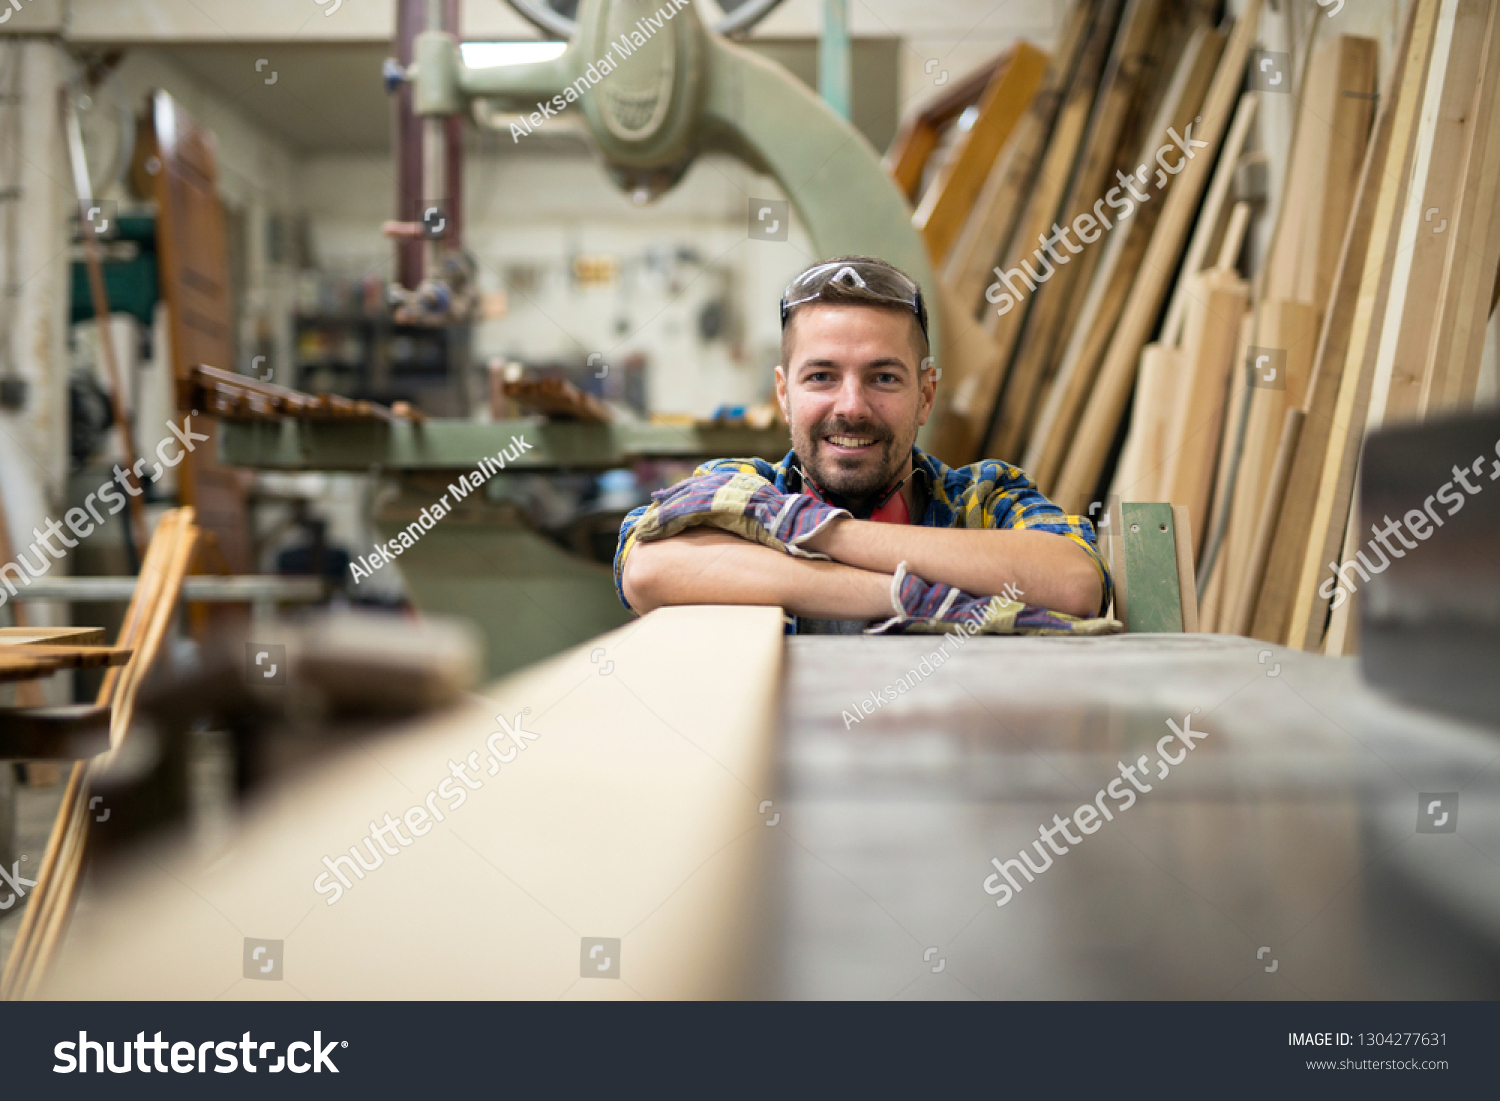 Portrait of professional woodworker standing next to a machine and wood material in his carpentry workshop. #1304277631